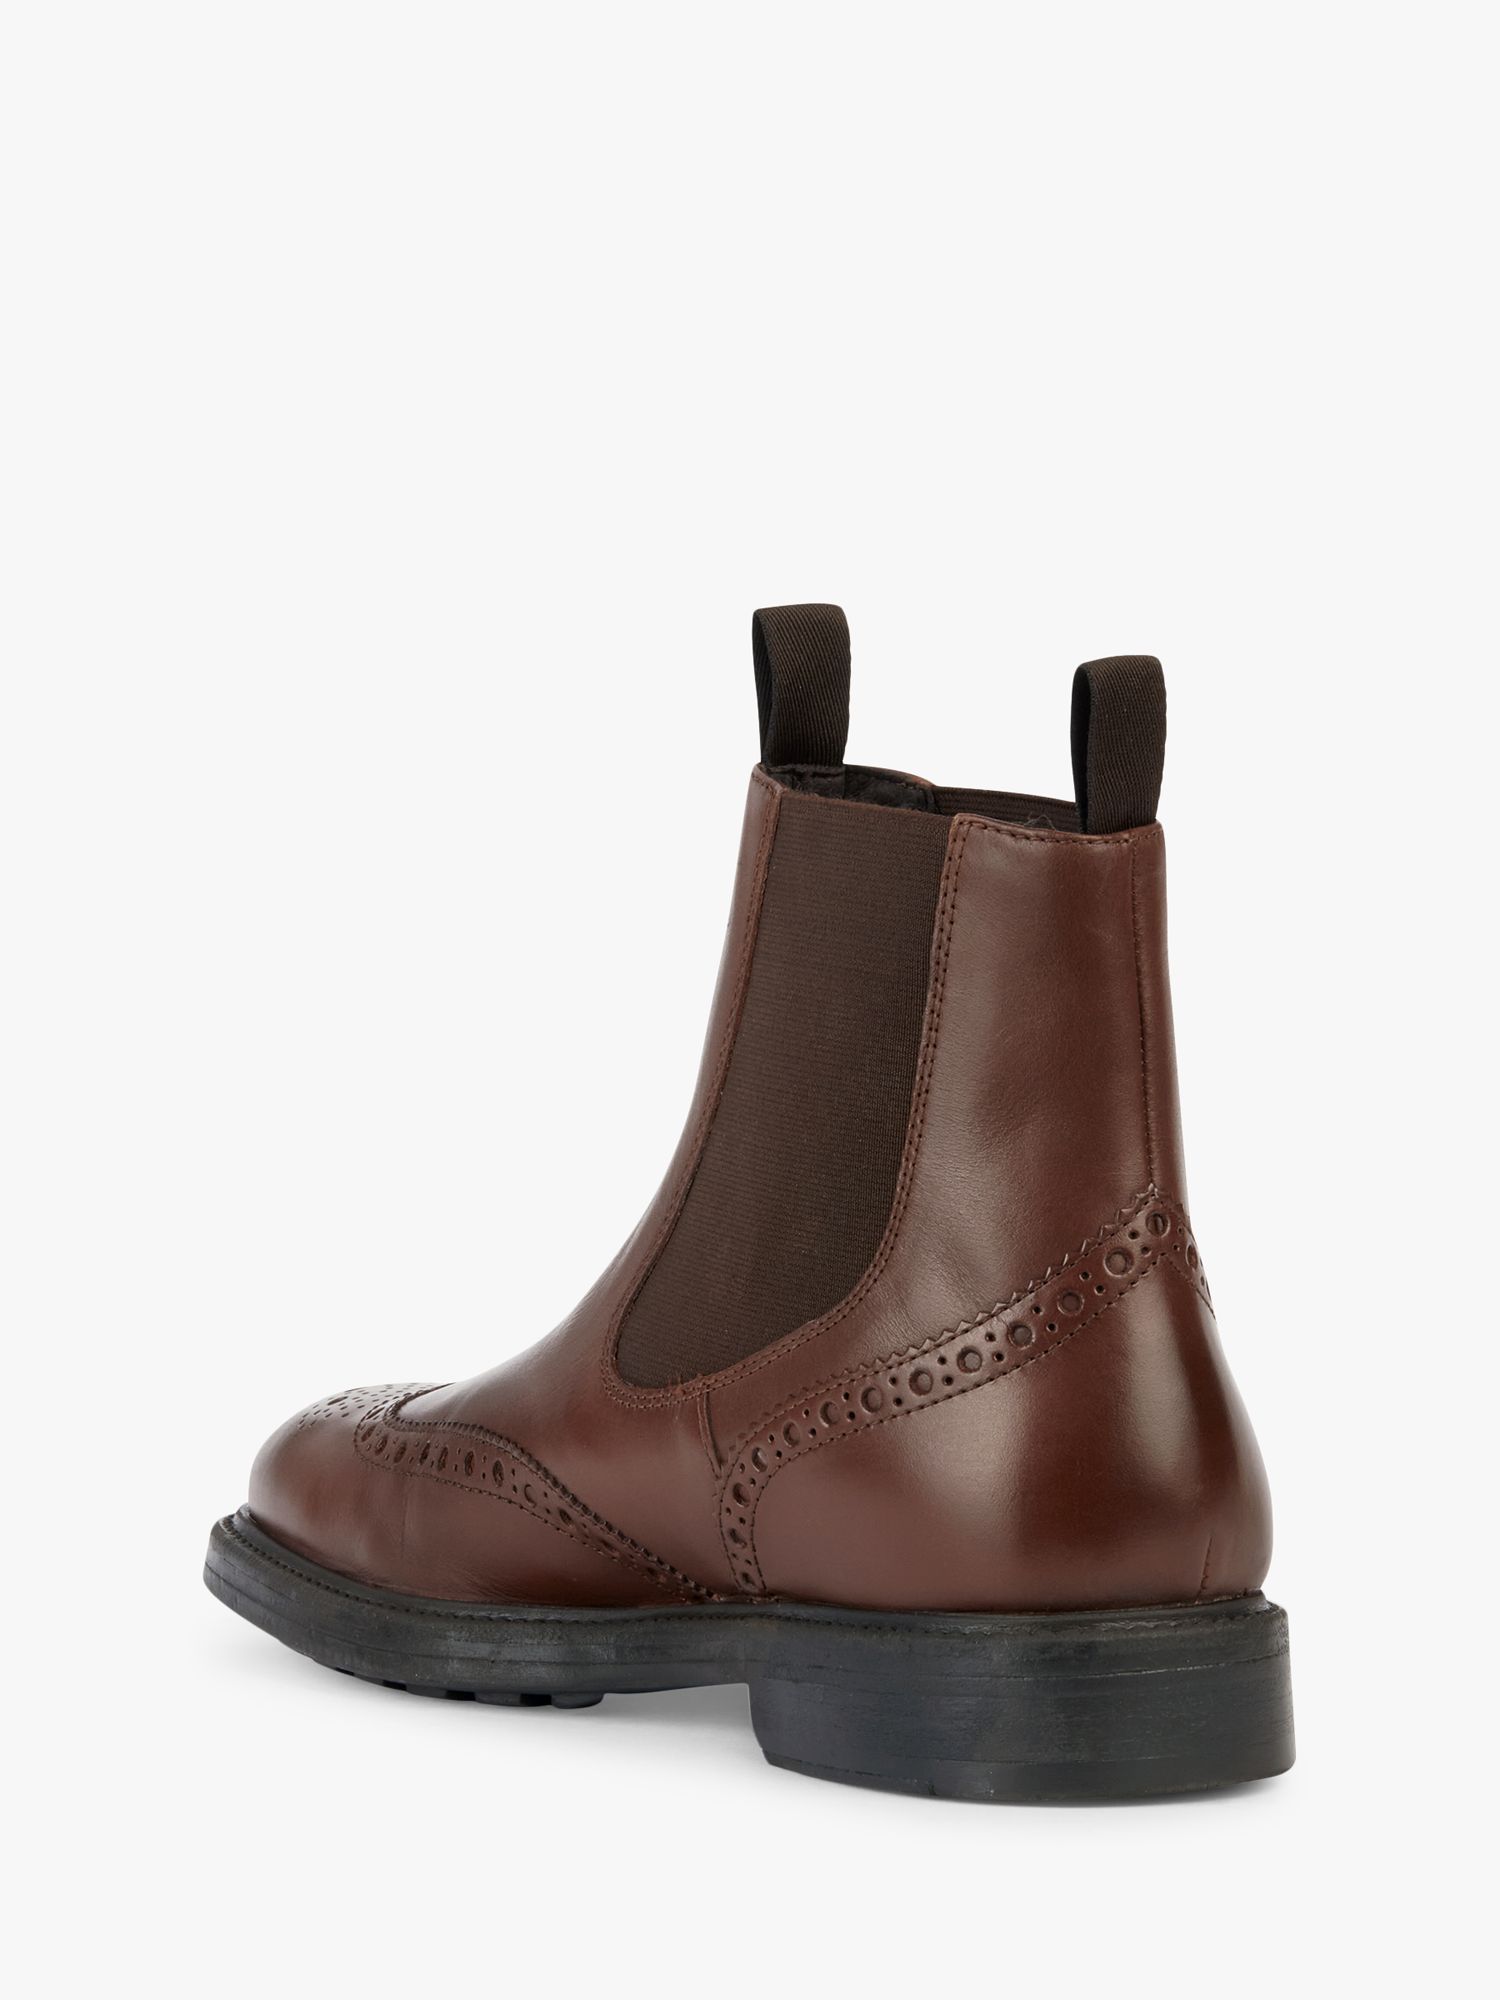 Geox Tiberio Leather Ankle Boots, Cognac at John Lewis & Partners